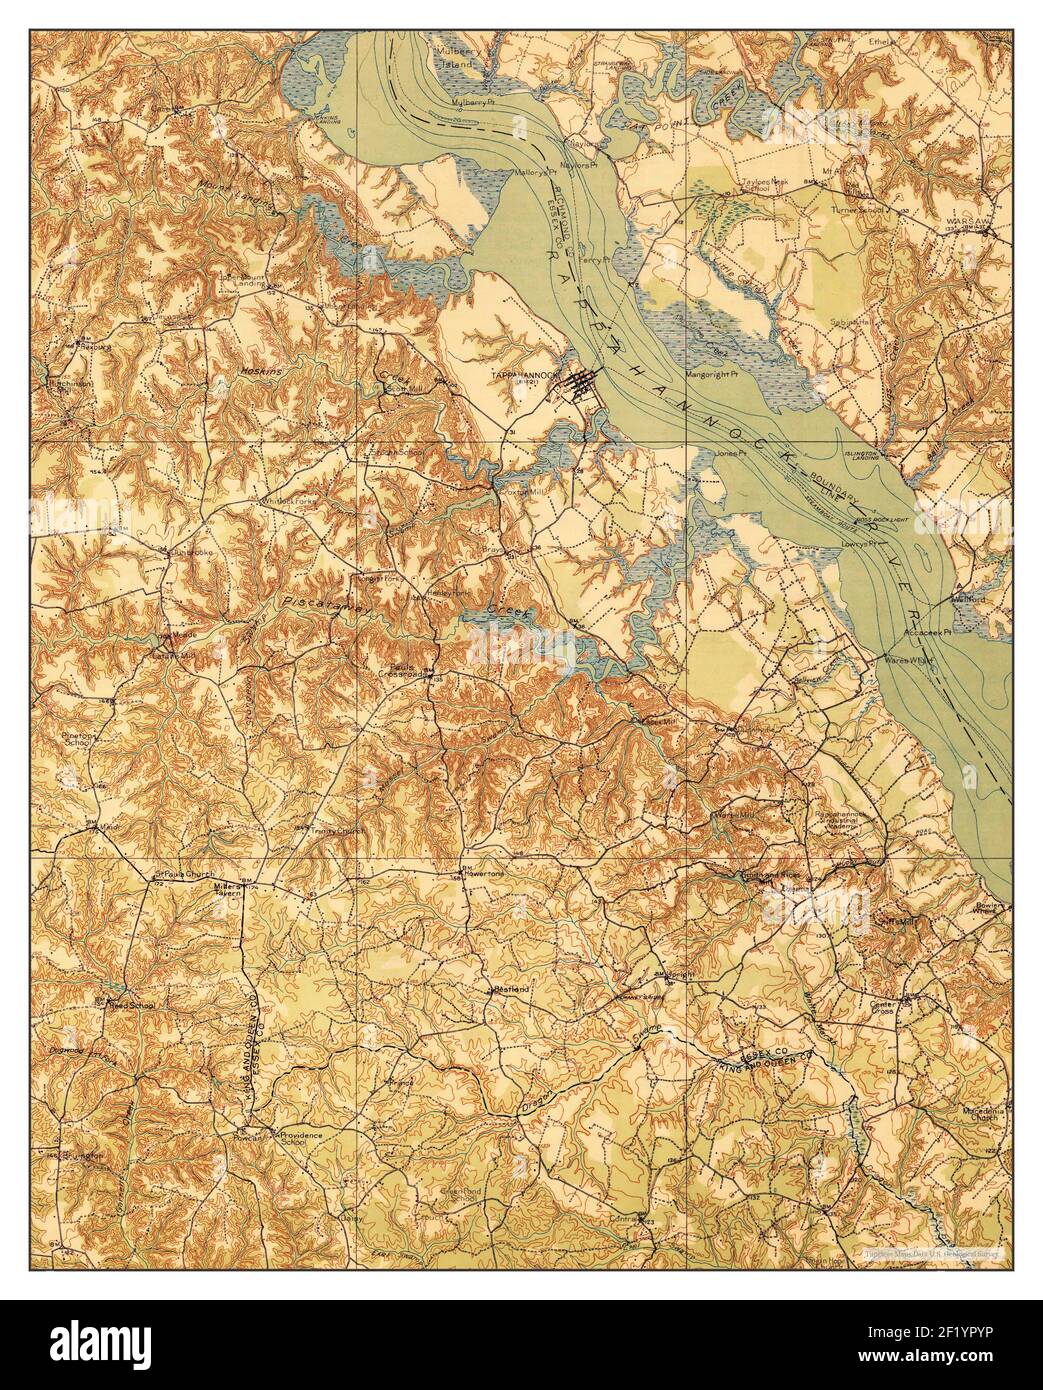 Tappahannock, Virginia, map 1918, 1:62500, United States of America by Timeless Maps, data U.S. Geological Survey Stock Photo